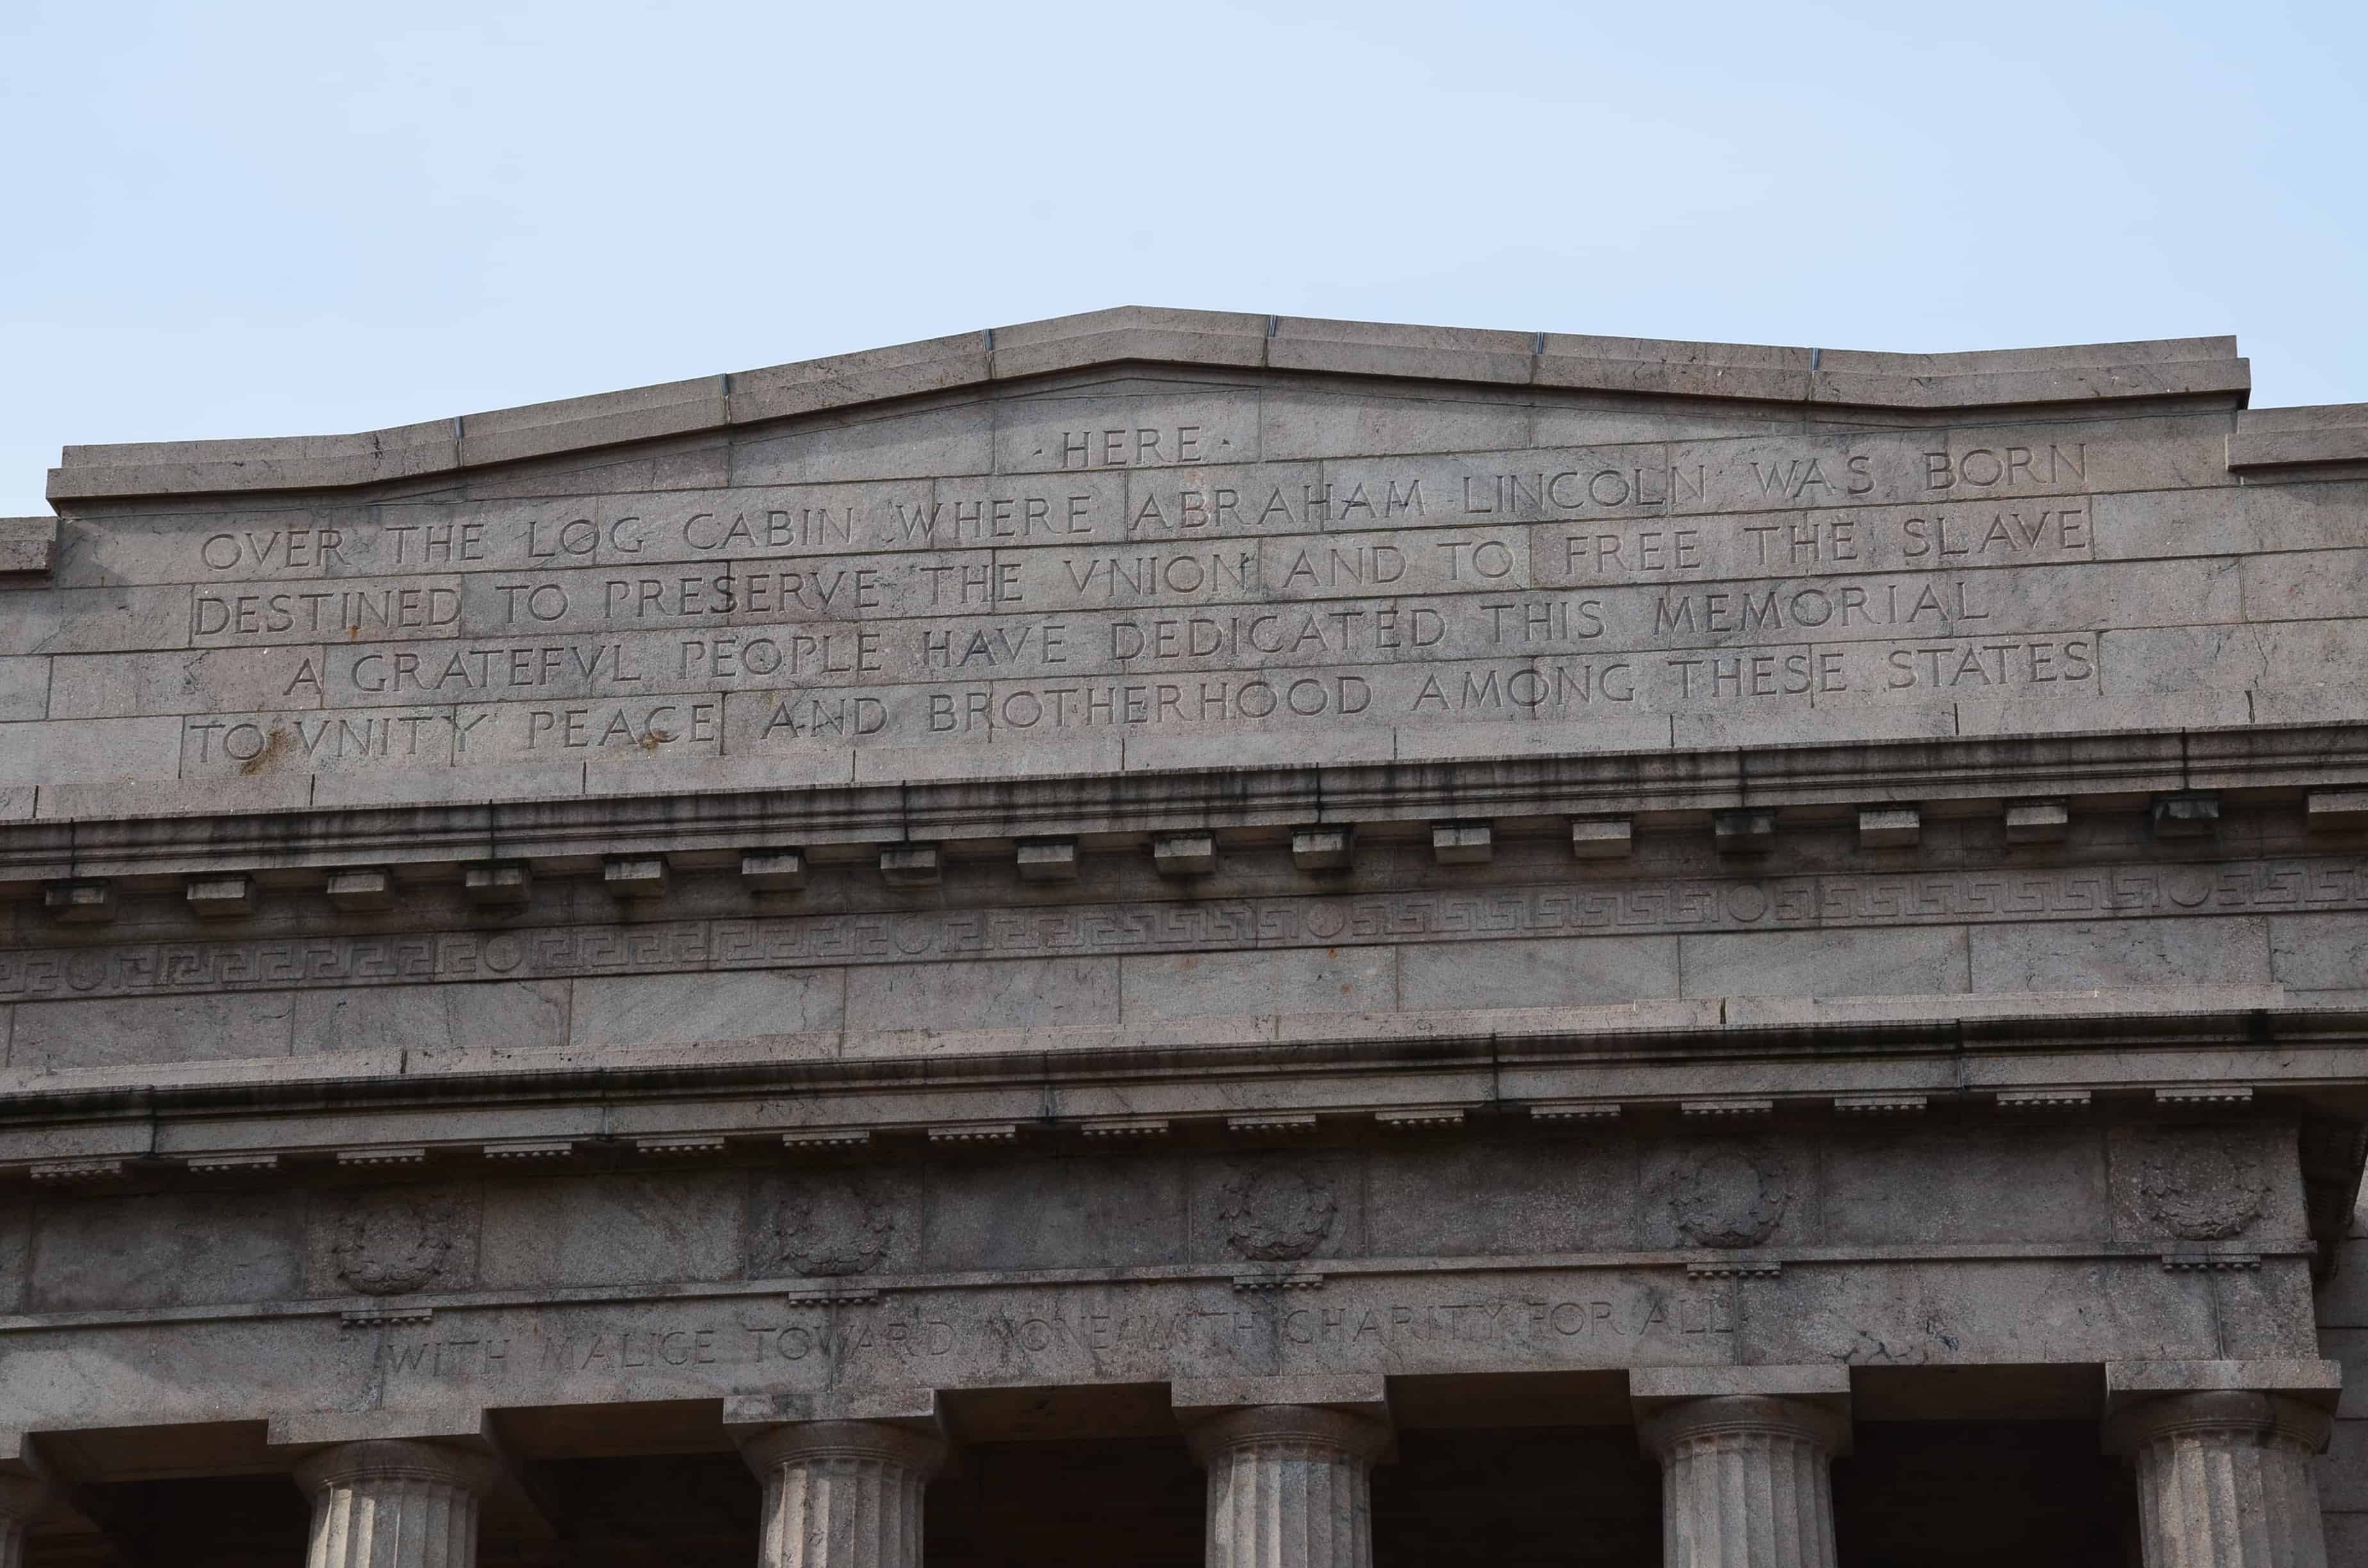 Inscriptions on the Memorial Building at Abraham Lincoln Birthplace National Historical Park in Kentucky